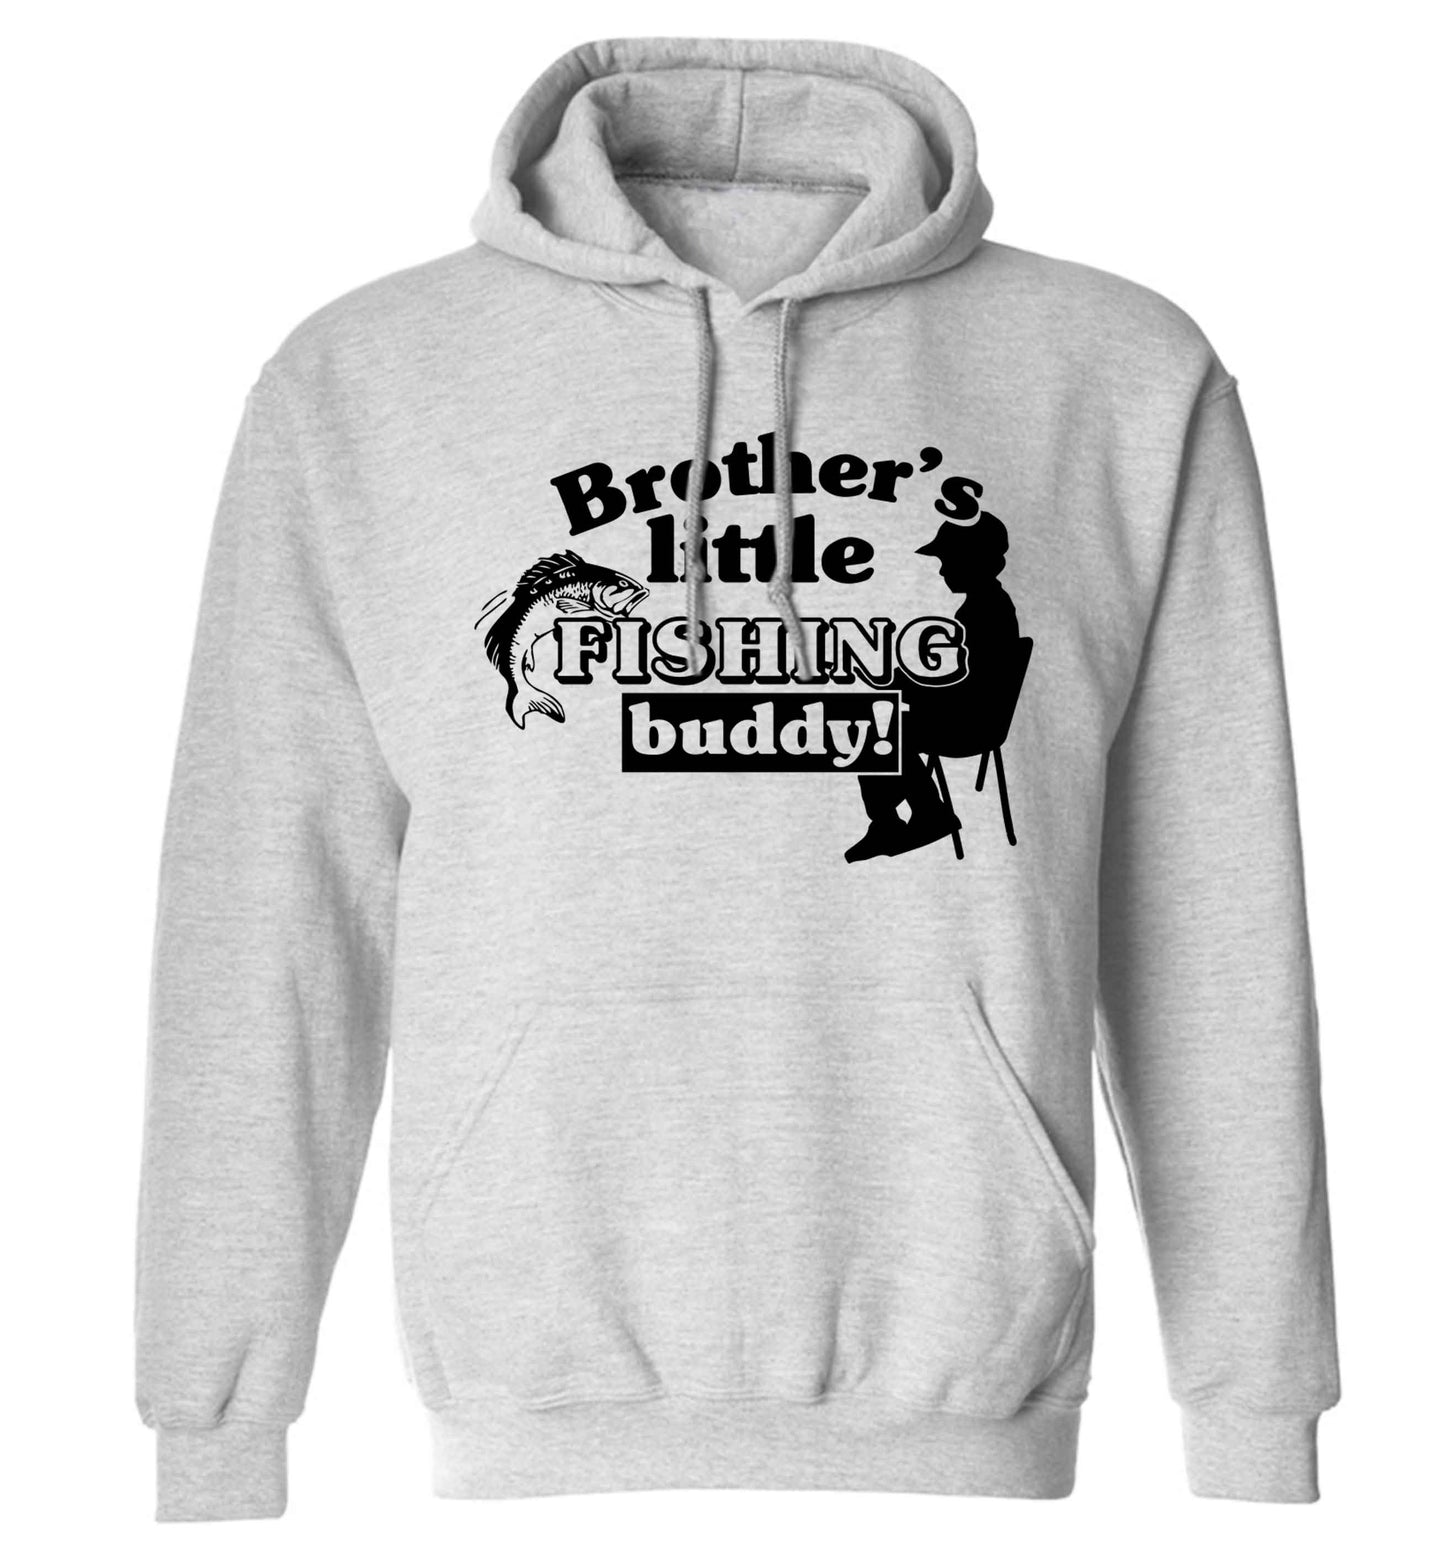 Brother's little fishing buddy adults unisex grey hoodie 2XL